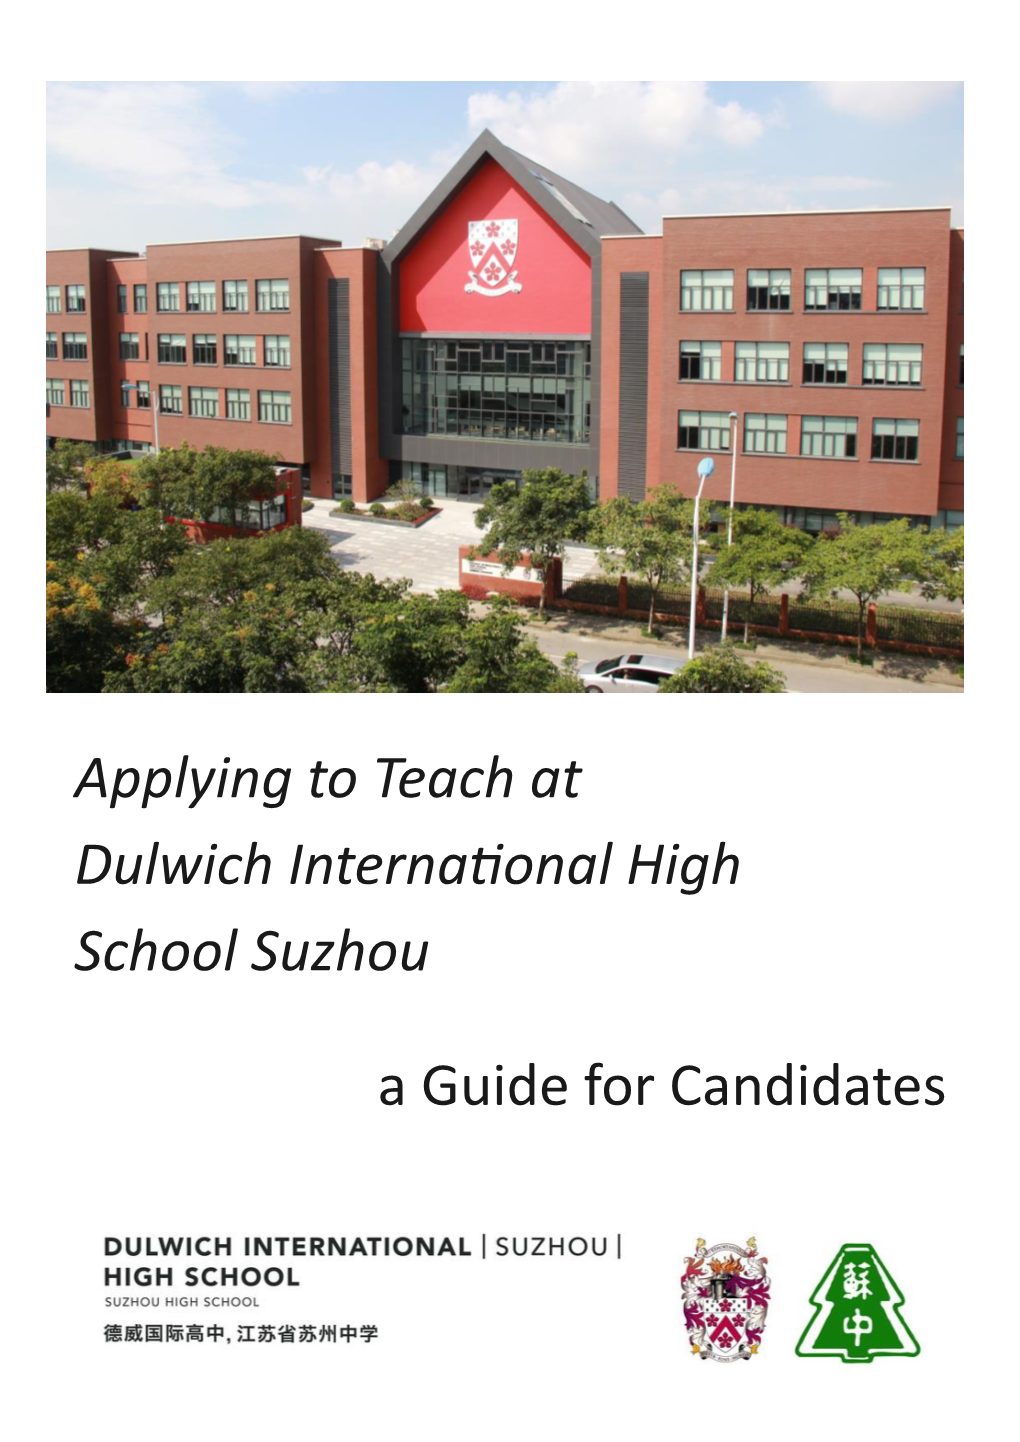 A Guide for Candidates Applying to Teach at Dulwich Internafional High